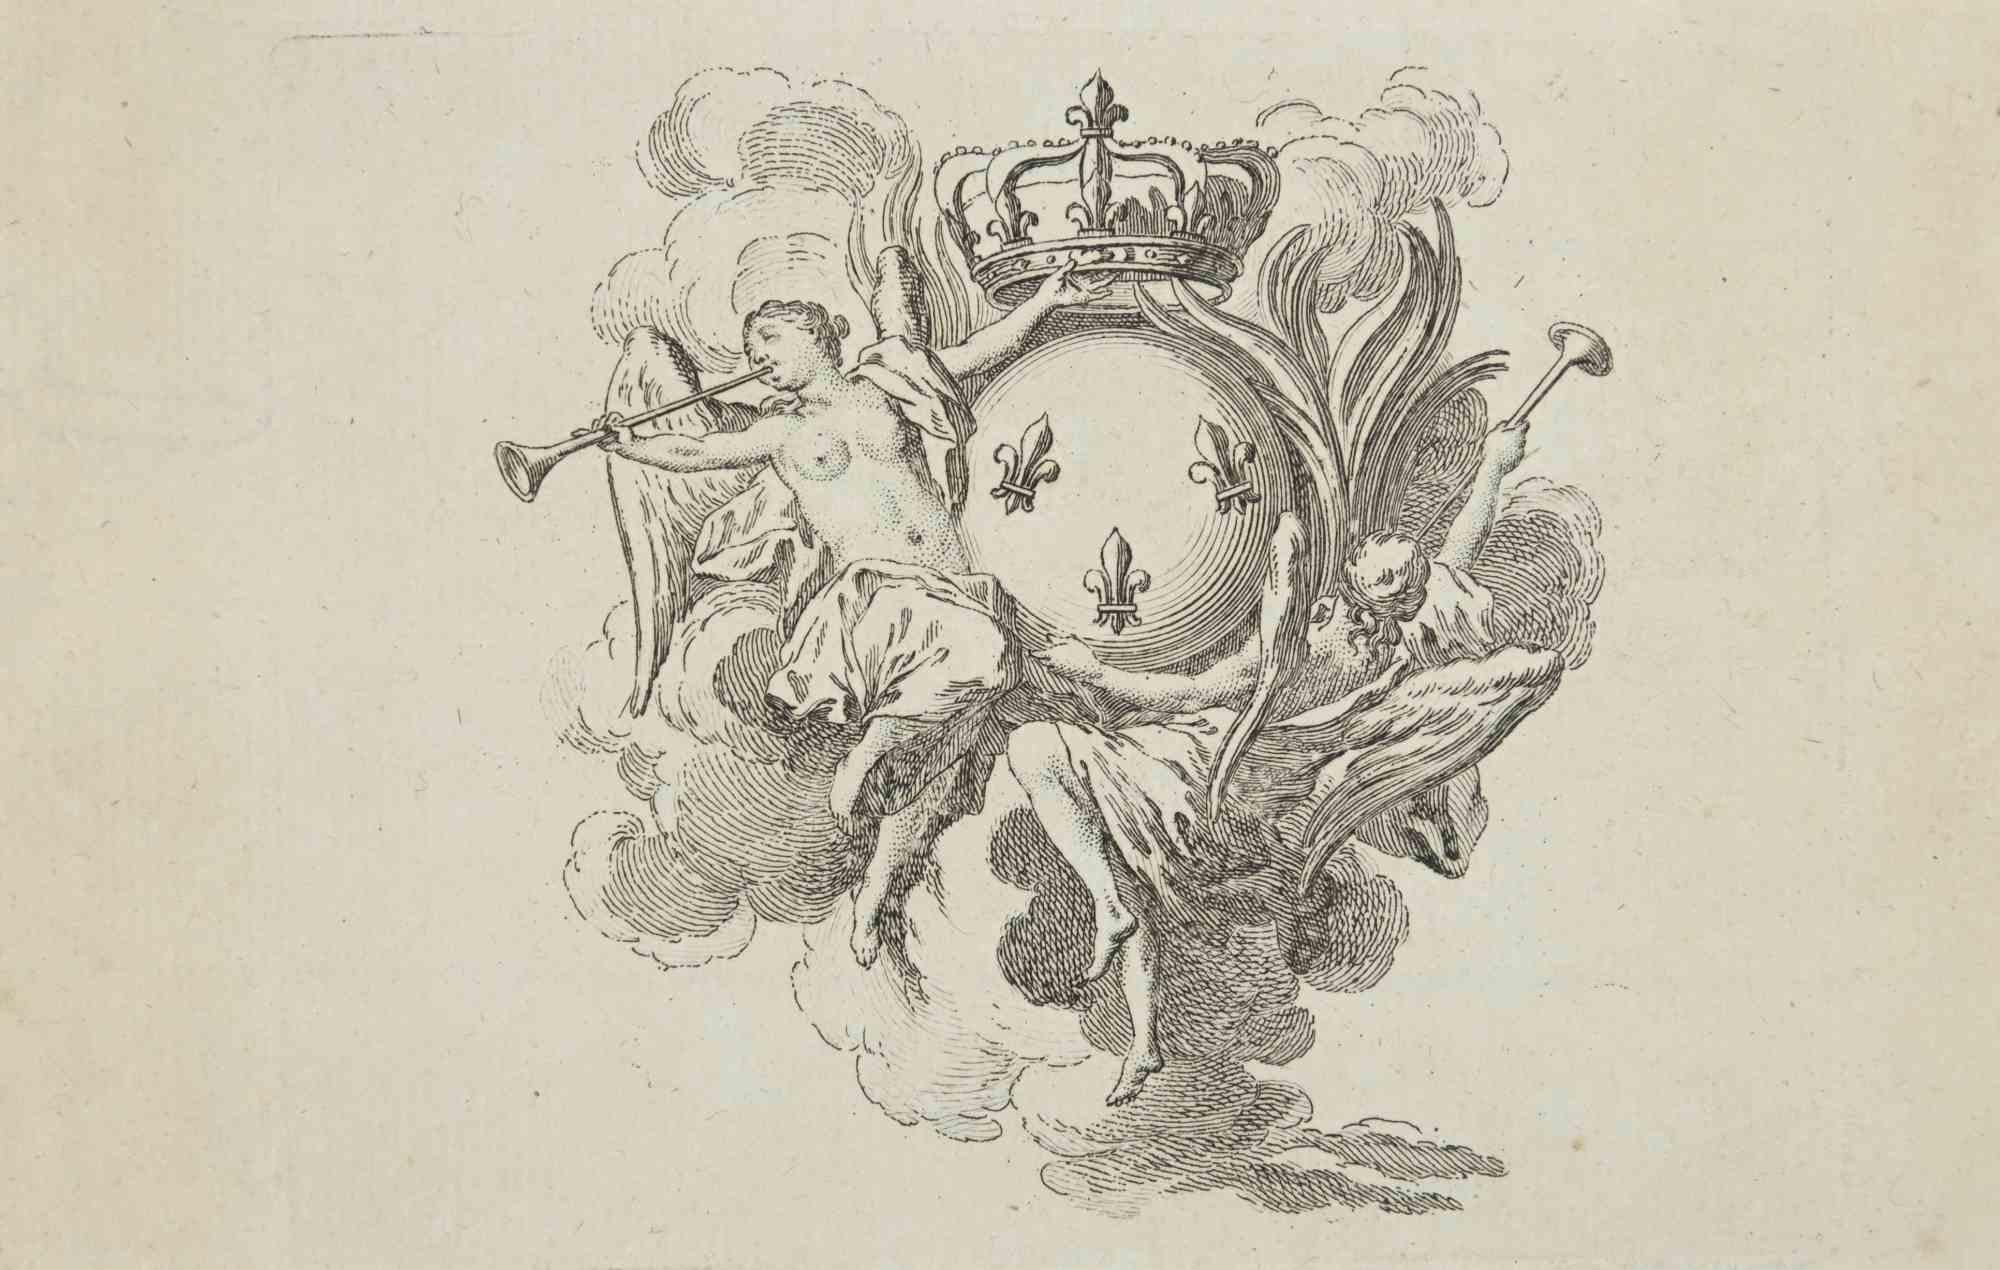 Composition with Angels is an etching realized in 1771 by Louis Legrand (1723-1807).

The Artwork is depicted through confident strokes in aa well balanced composition.

Good conditions.   
 